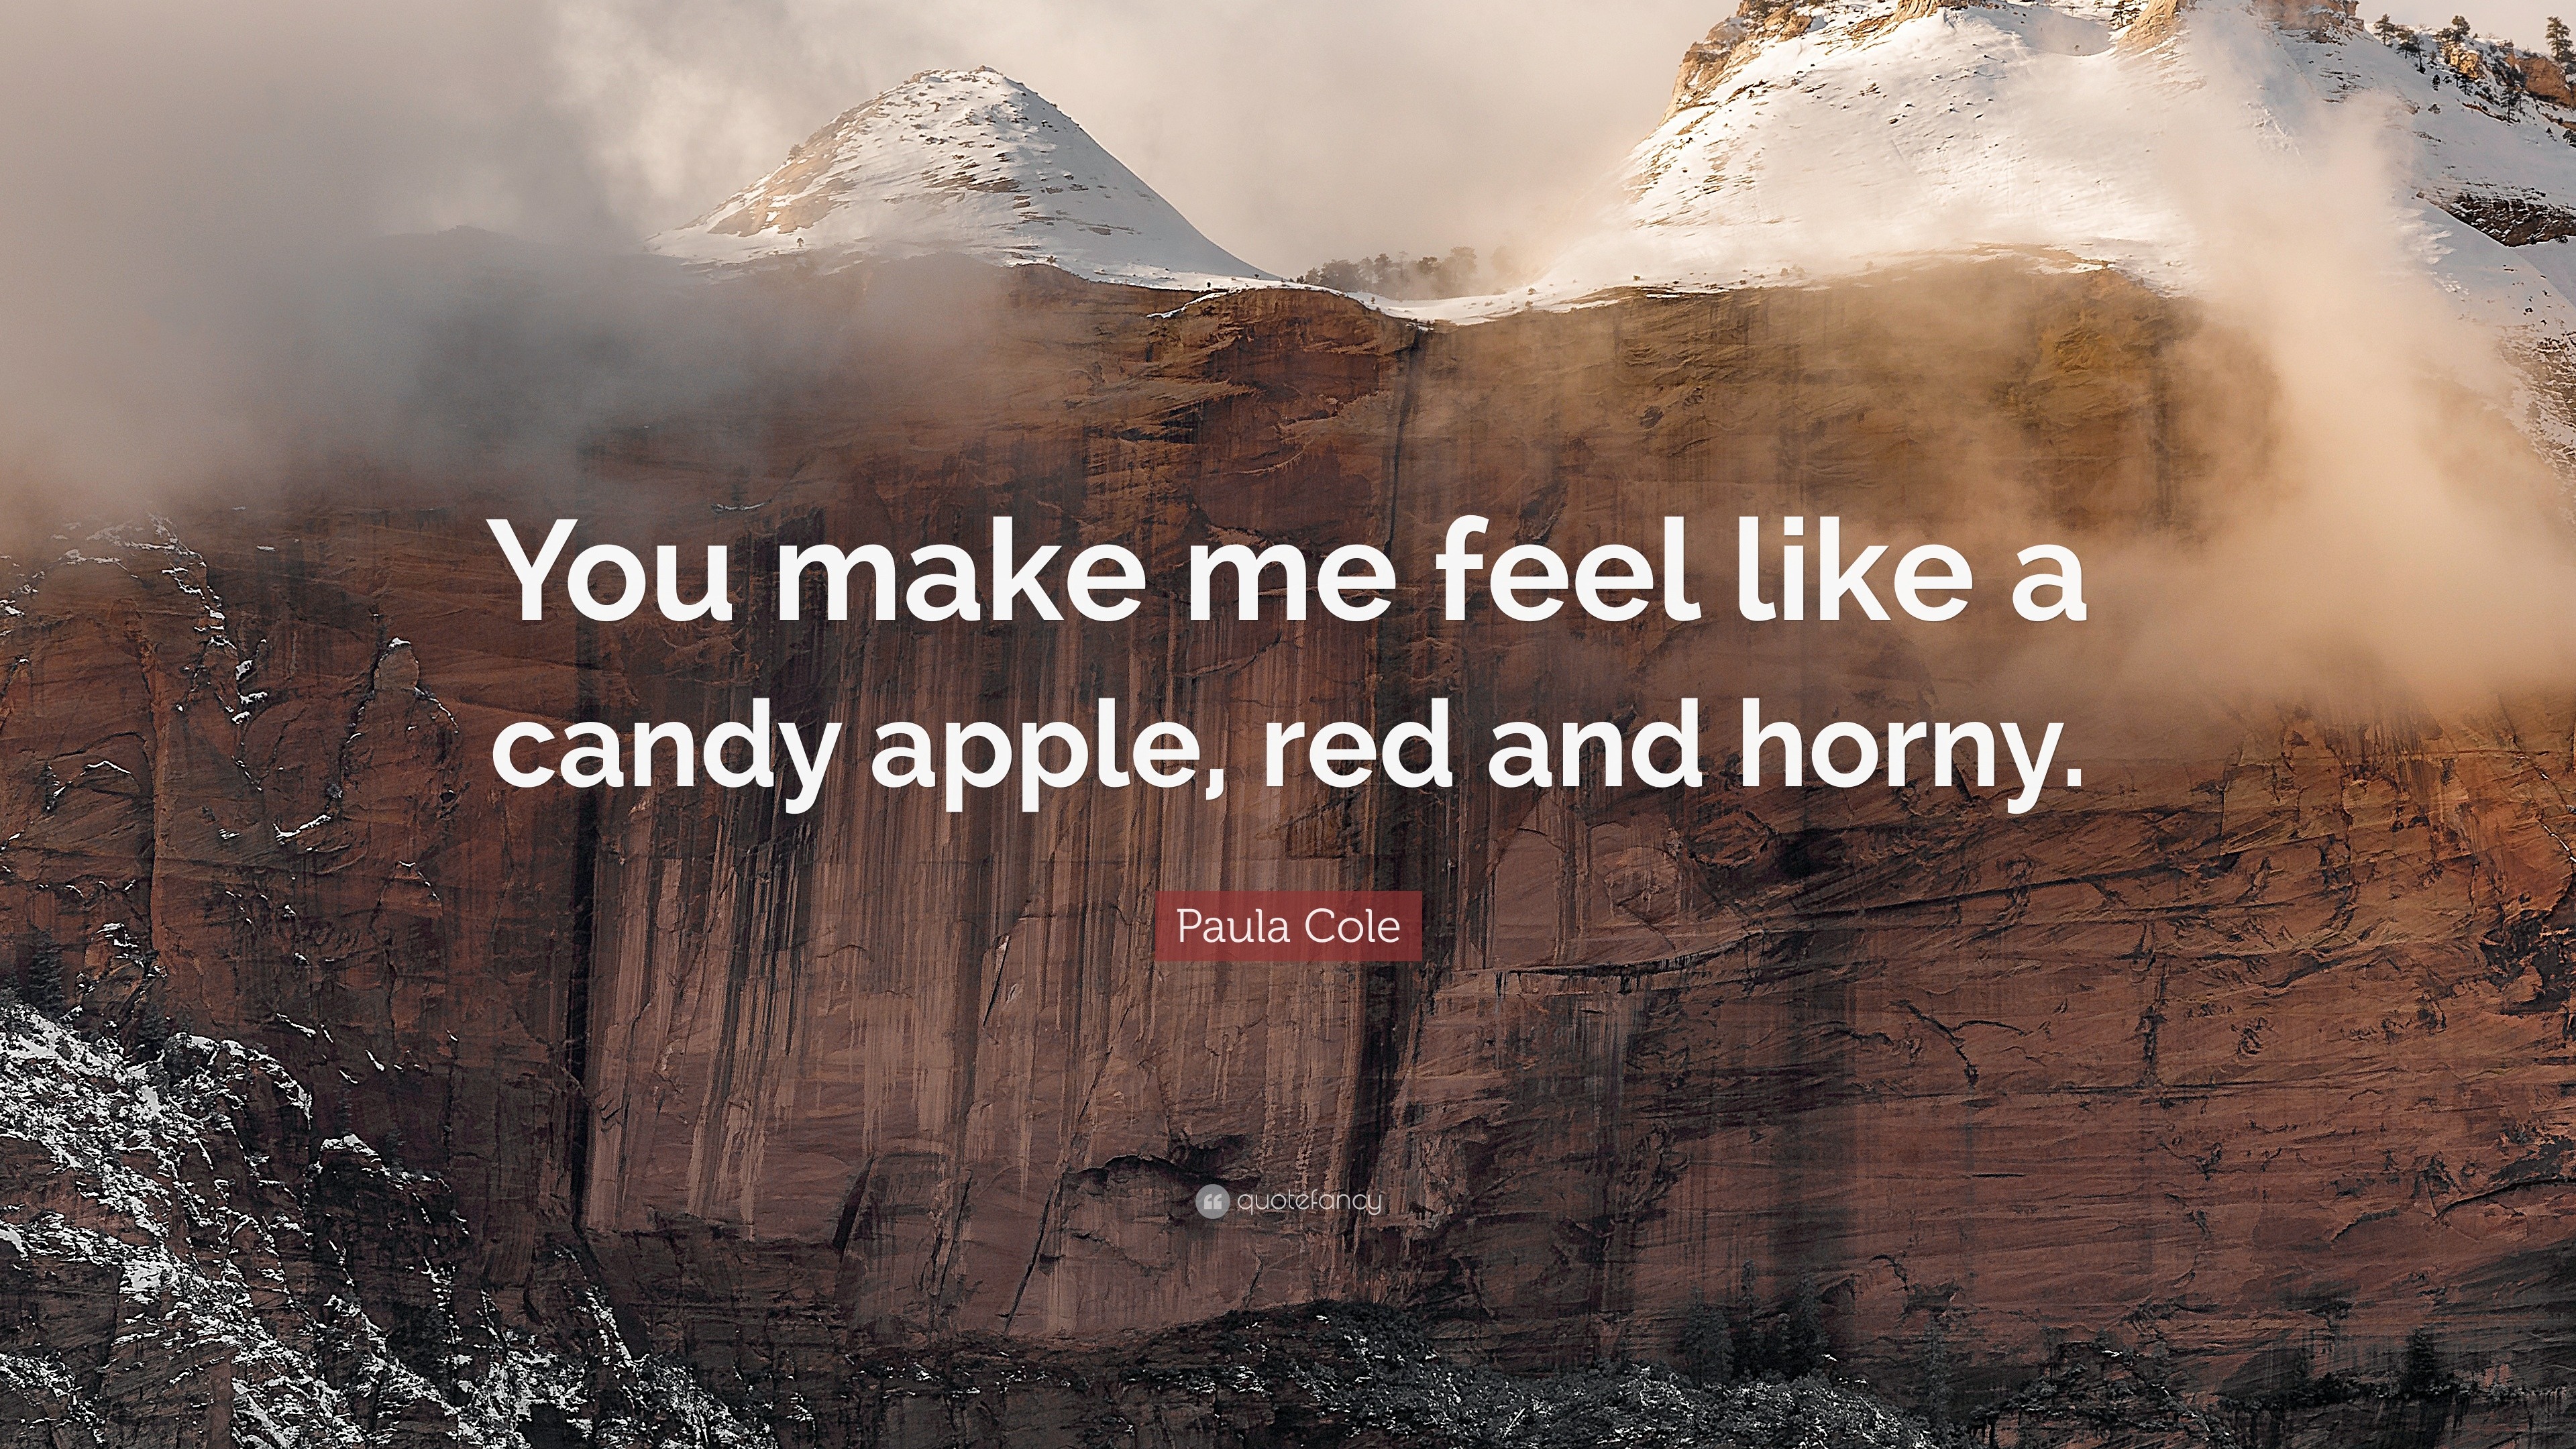 Paula Cole Quote “You make me feel like a candy apple red and